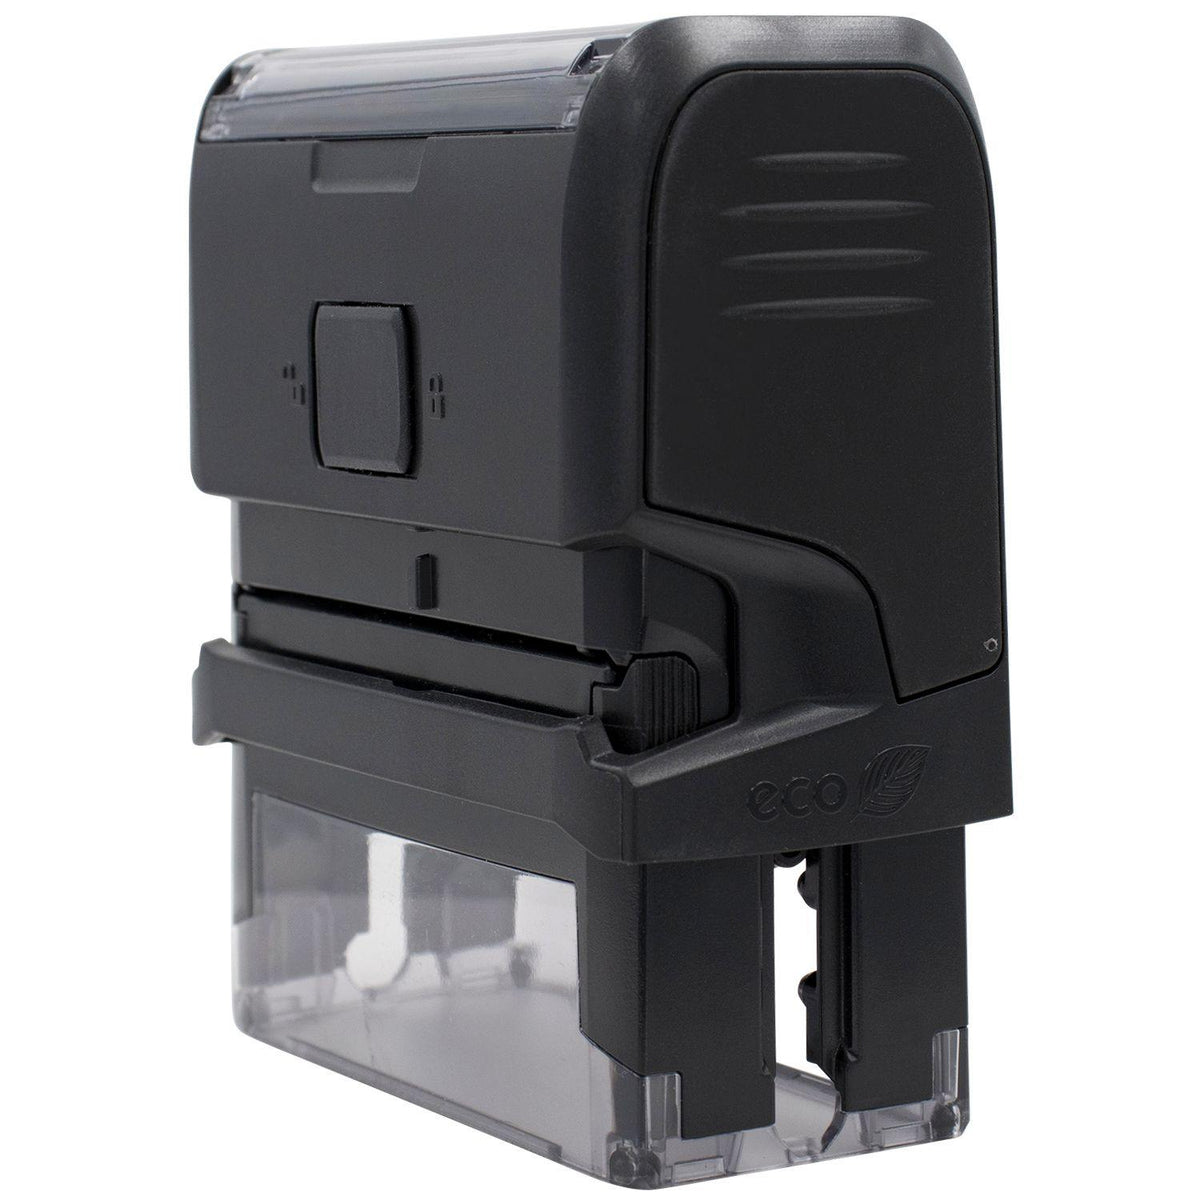 Self-Inking First Class Stamp - Engineer Seal Stamps - Brand_Trodat, Impression Size_Small, Stamp Type_Self-Inking Stamp, Type of Use_Office, Type of Use_Postal &amp; Mailing, Type of Use_Professional